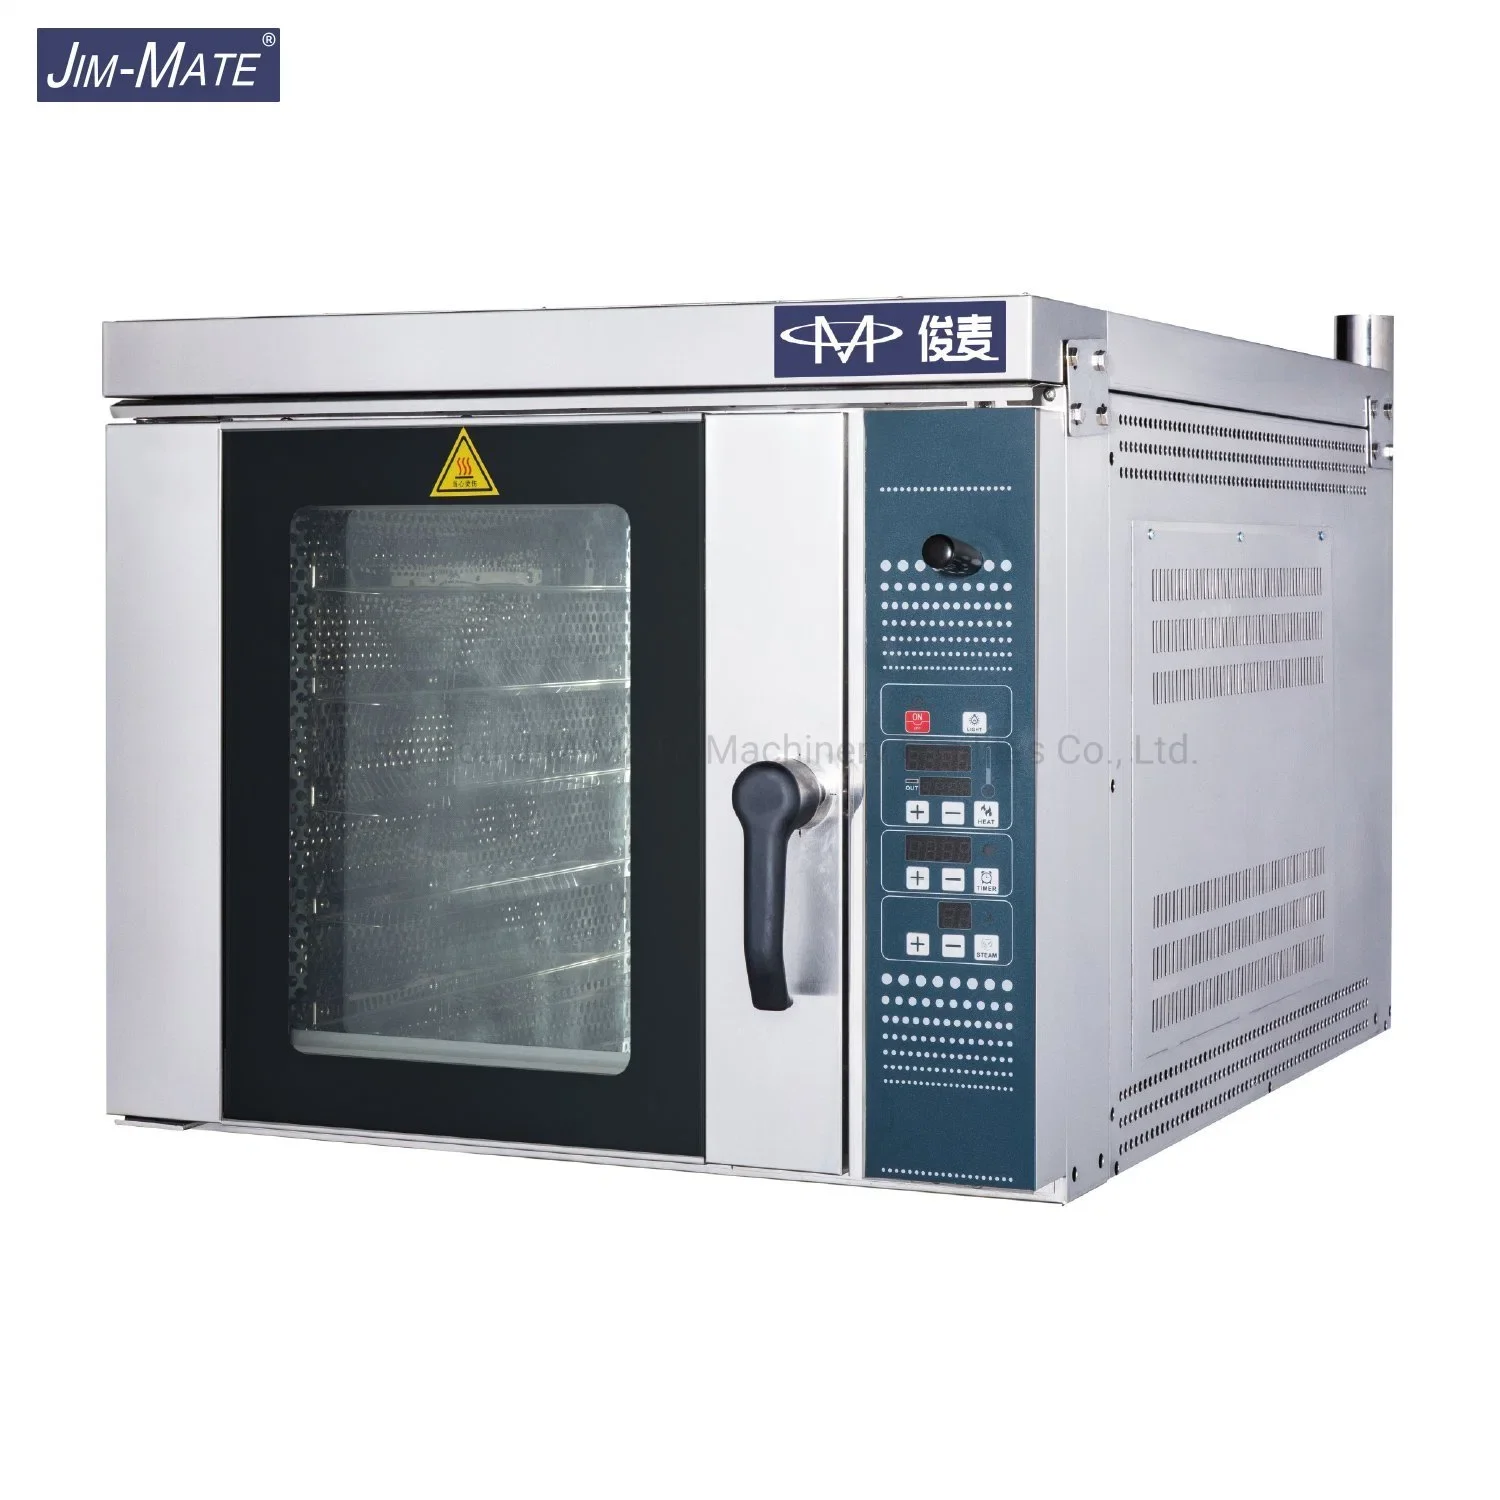 Bakery Equipment Kitchen Catering Equipment Commercial Use Cake Shop Machine 5 Trays Bread Cake Pizza Baking Machine Electric cap chef hat restaurant catering chef hat kitchen cooking comfortable fashion for adults kitchen cooking